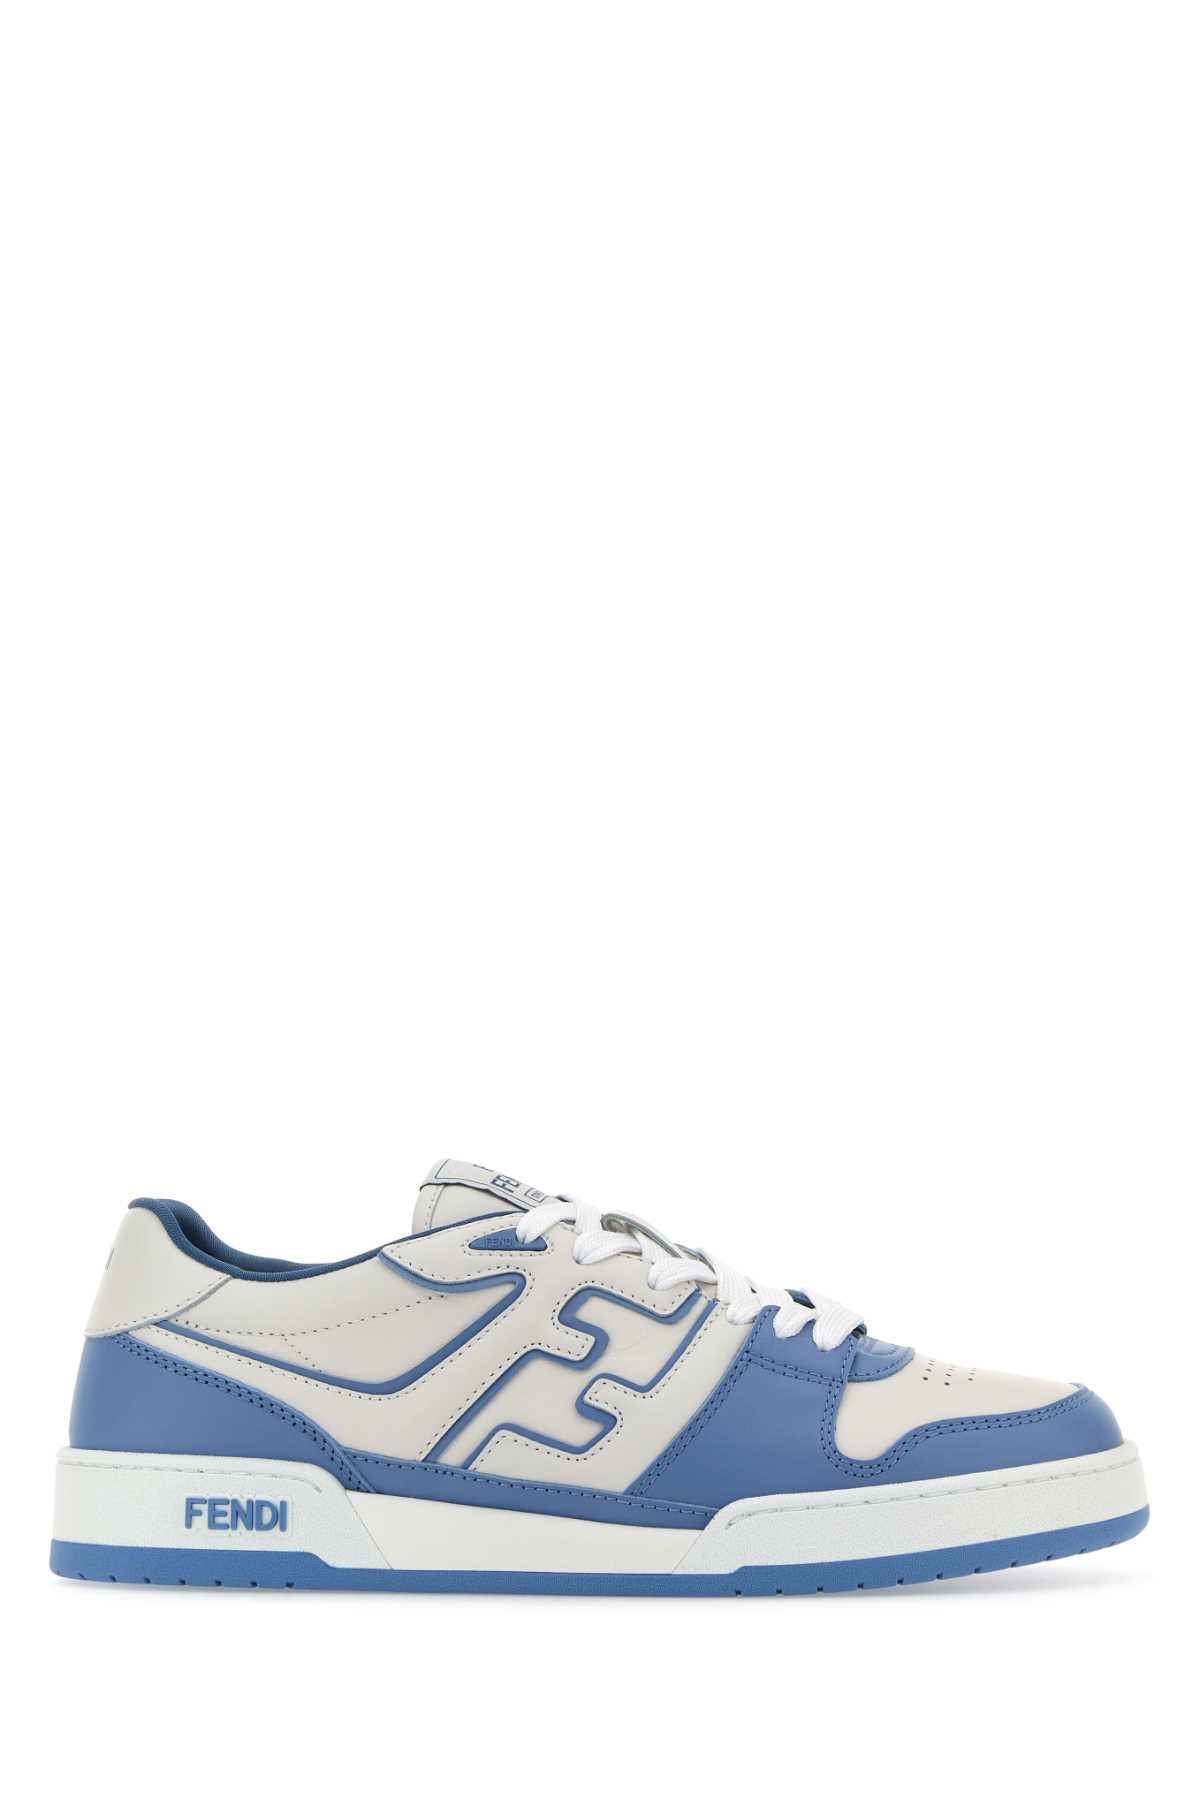 Shop Fendi Two-tone Leather  Match Sneakers In Skybiancoskysky